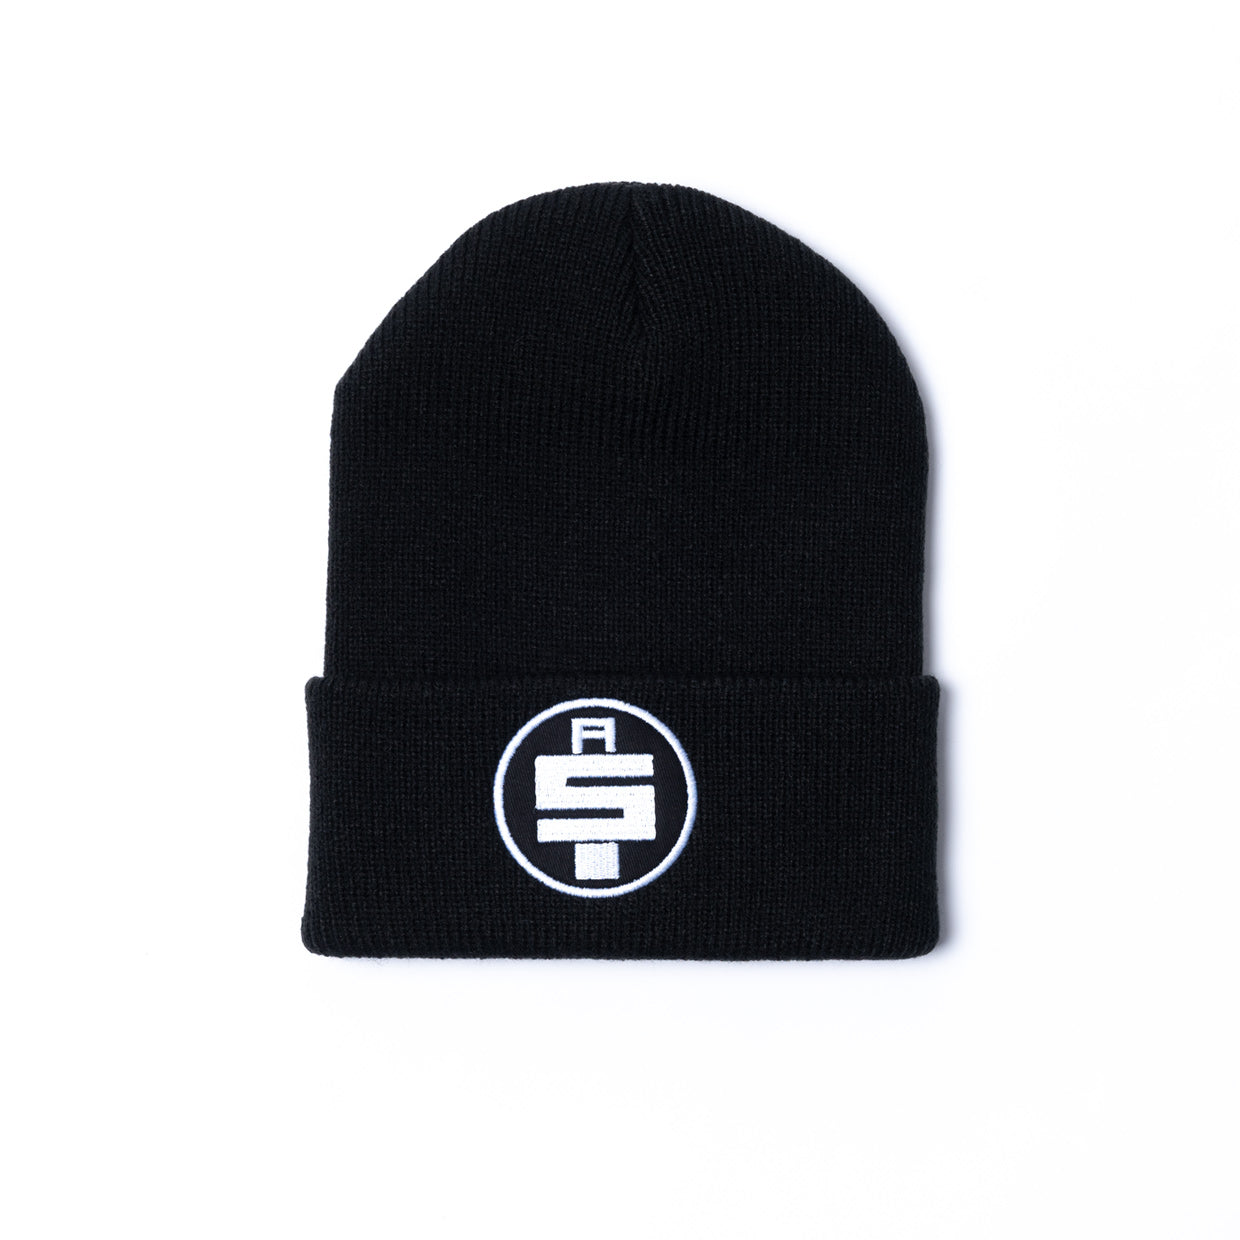 All Money In Limited Edition Heavyweight Beanie - Black/White